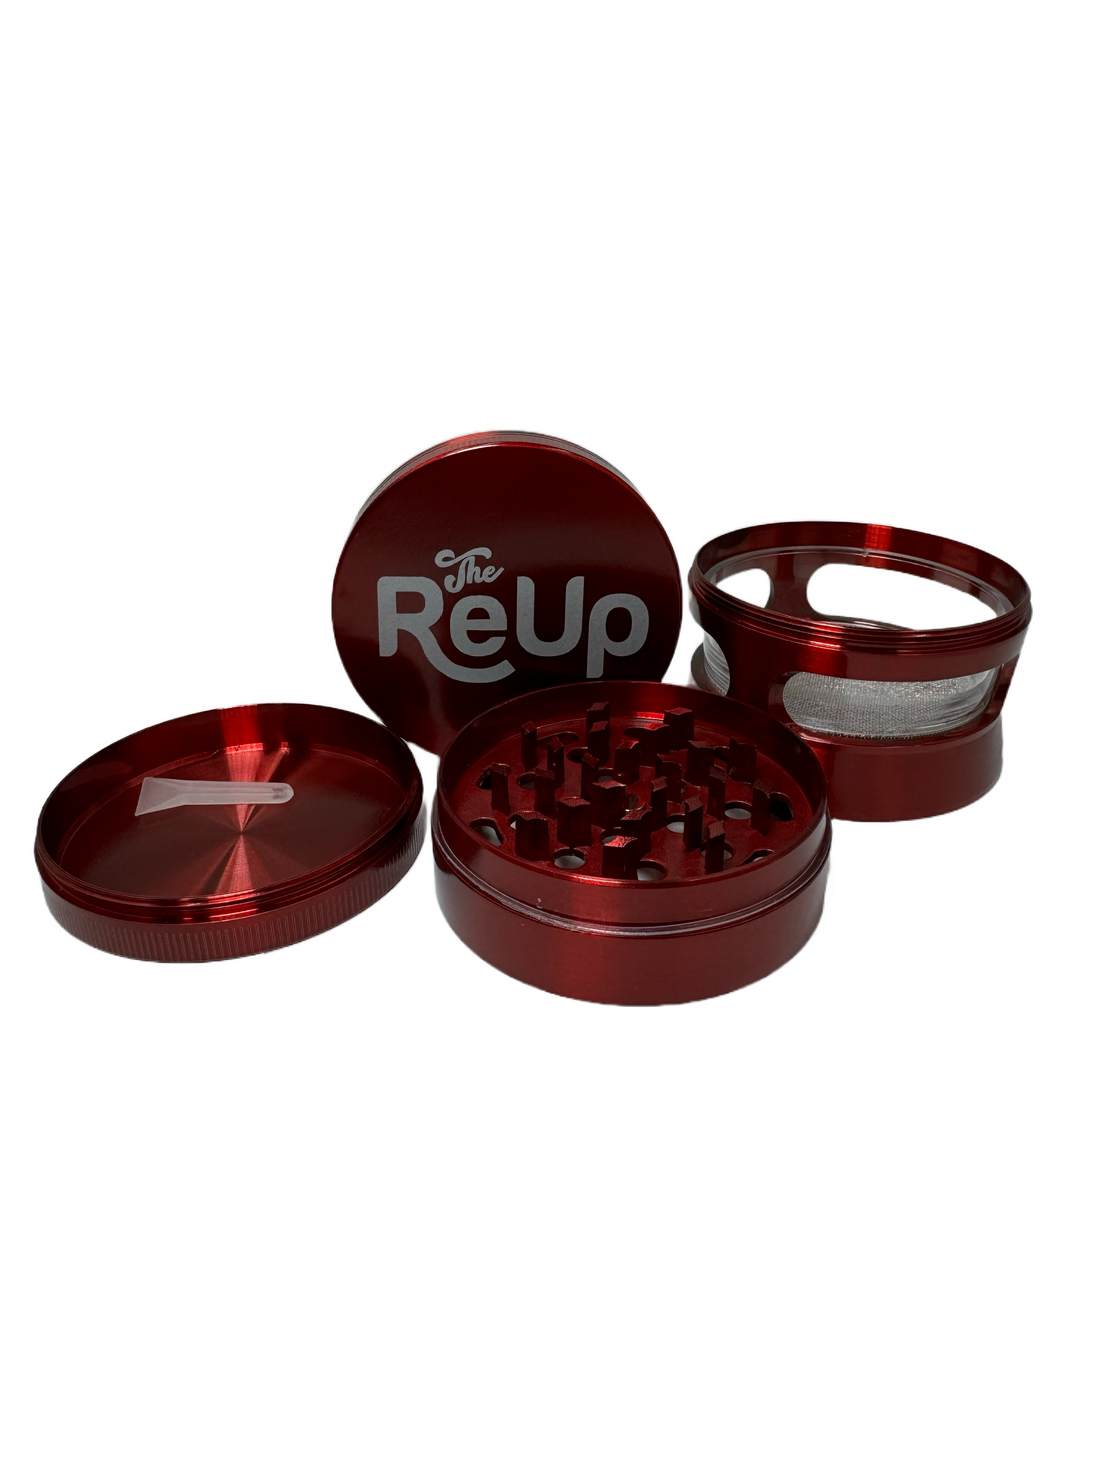 The Re Up Grinder - 4 Piece Grinder with See Through Chamber